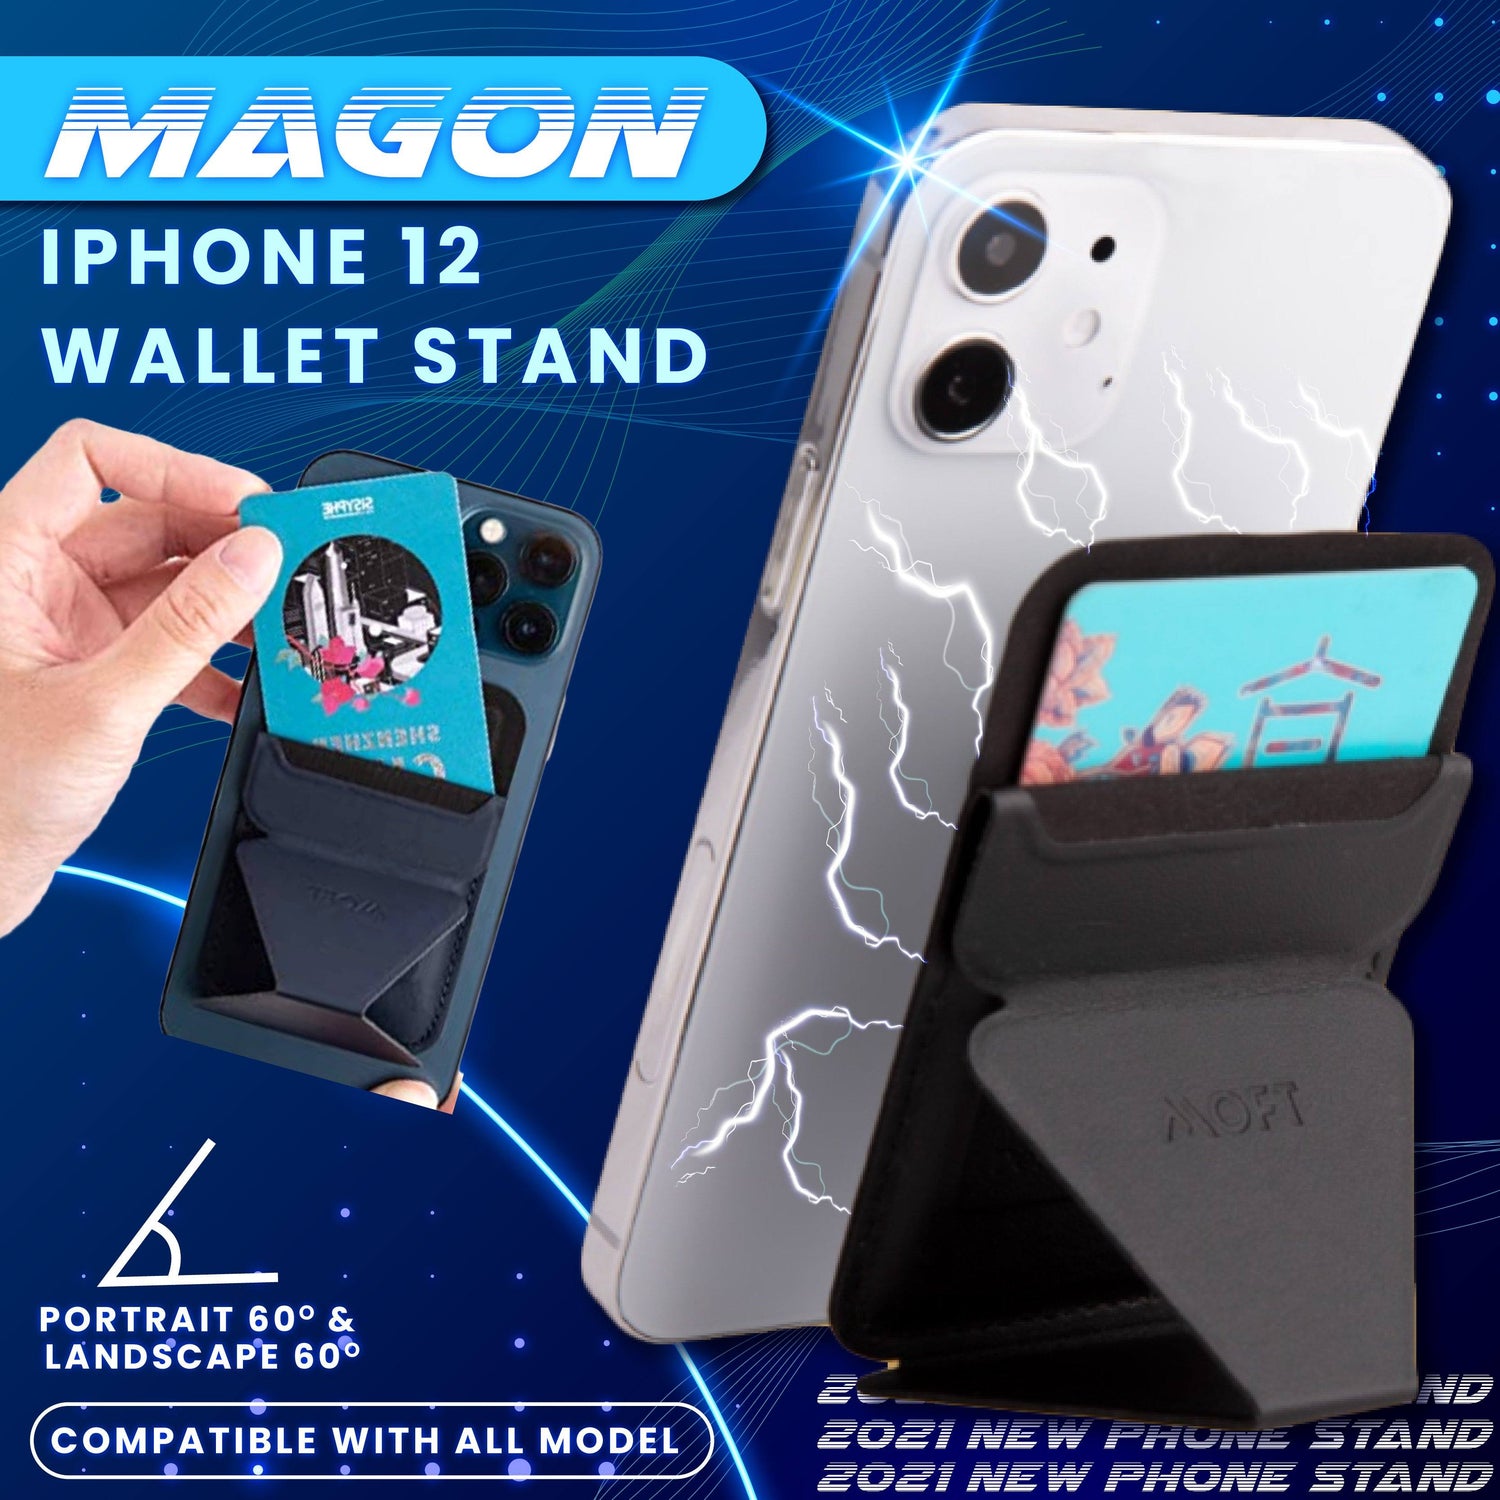 MagOn iPhone 12 Wallet Stand 1688 